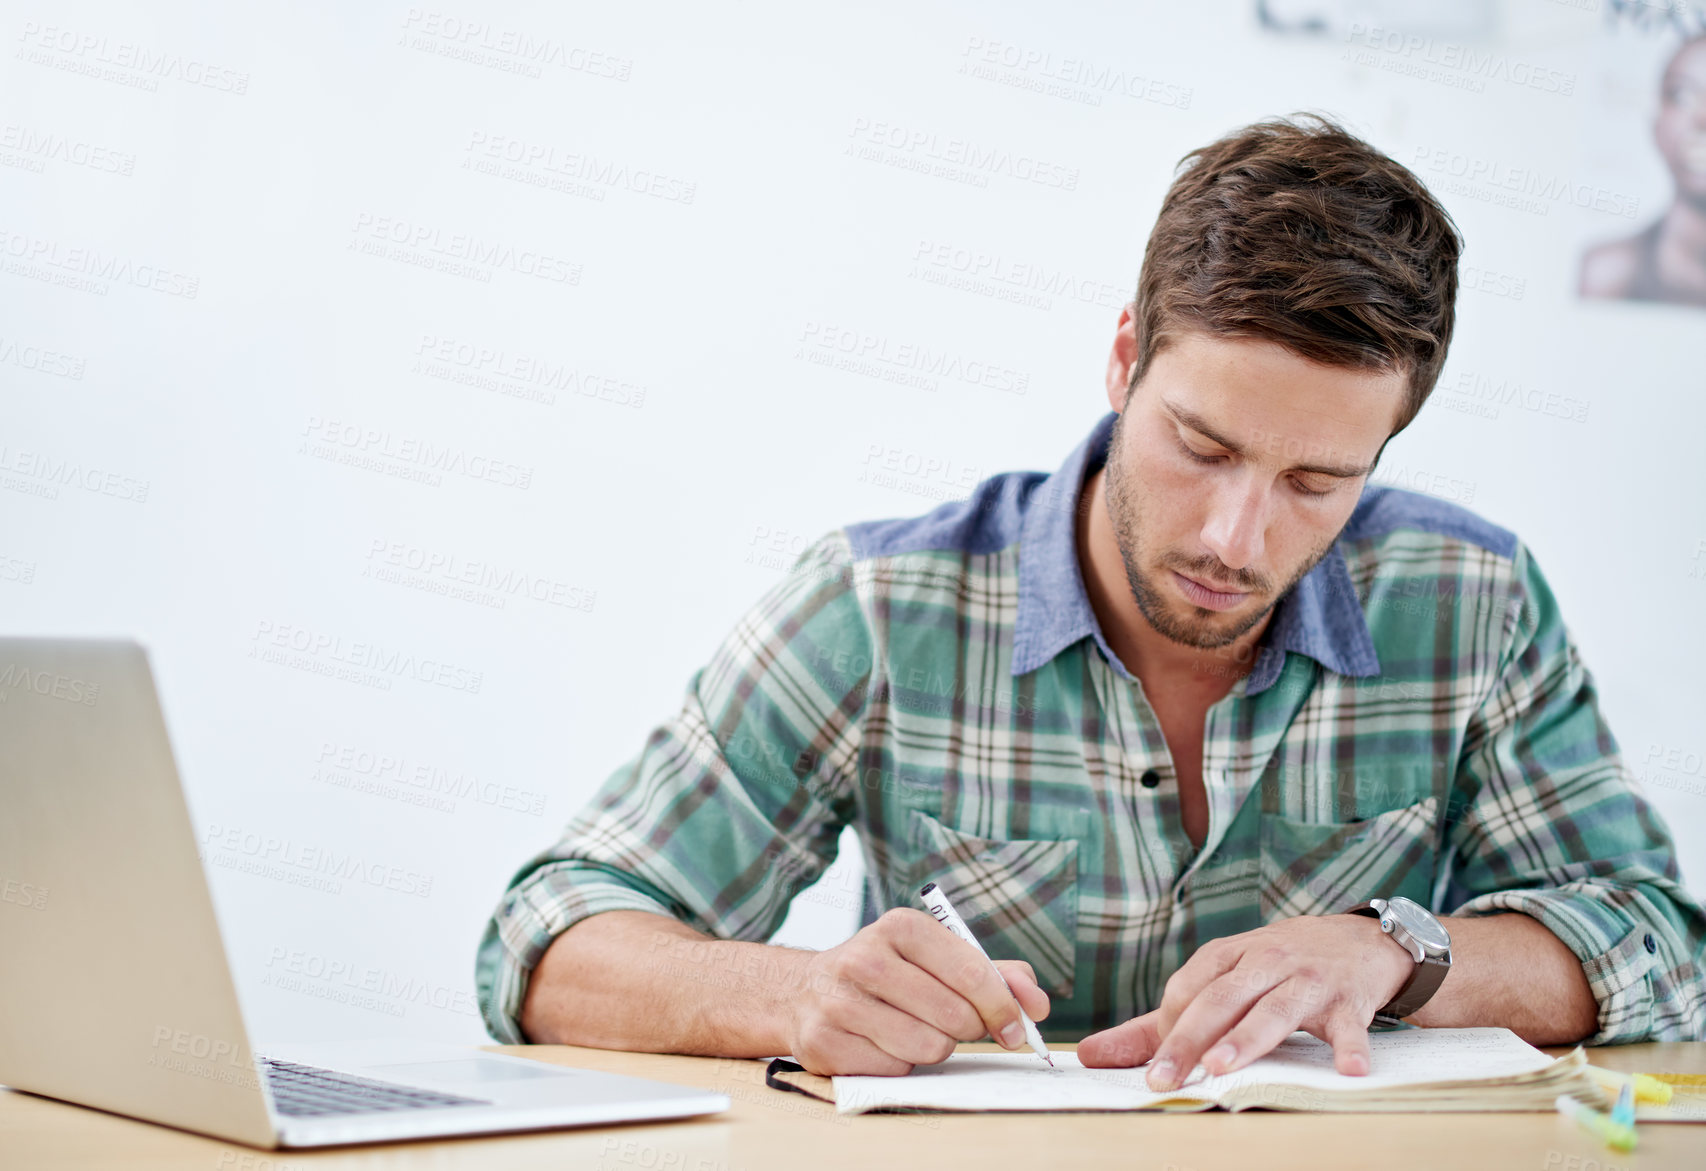 Buy stock photo Shot of a casually-dressed young man using a digital tablet at his desk. The commercial designs displayed  represent a simulation of a real product and have been changed or altered enough by our team of retouching and design specialists so that they don't have copyright infringements